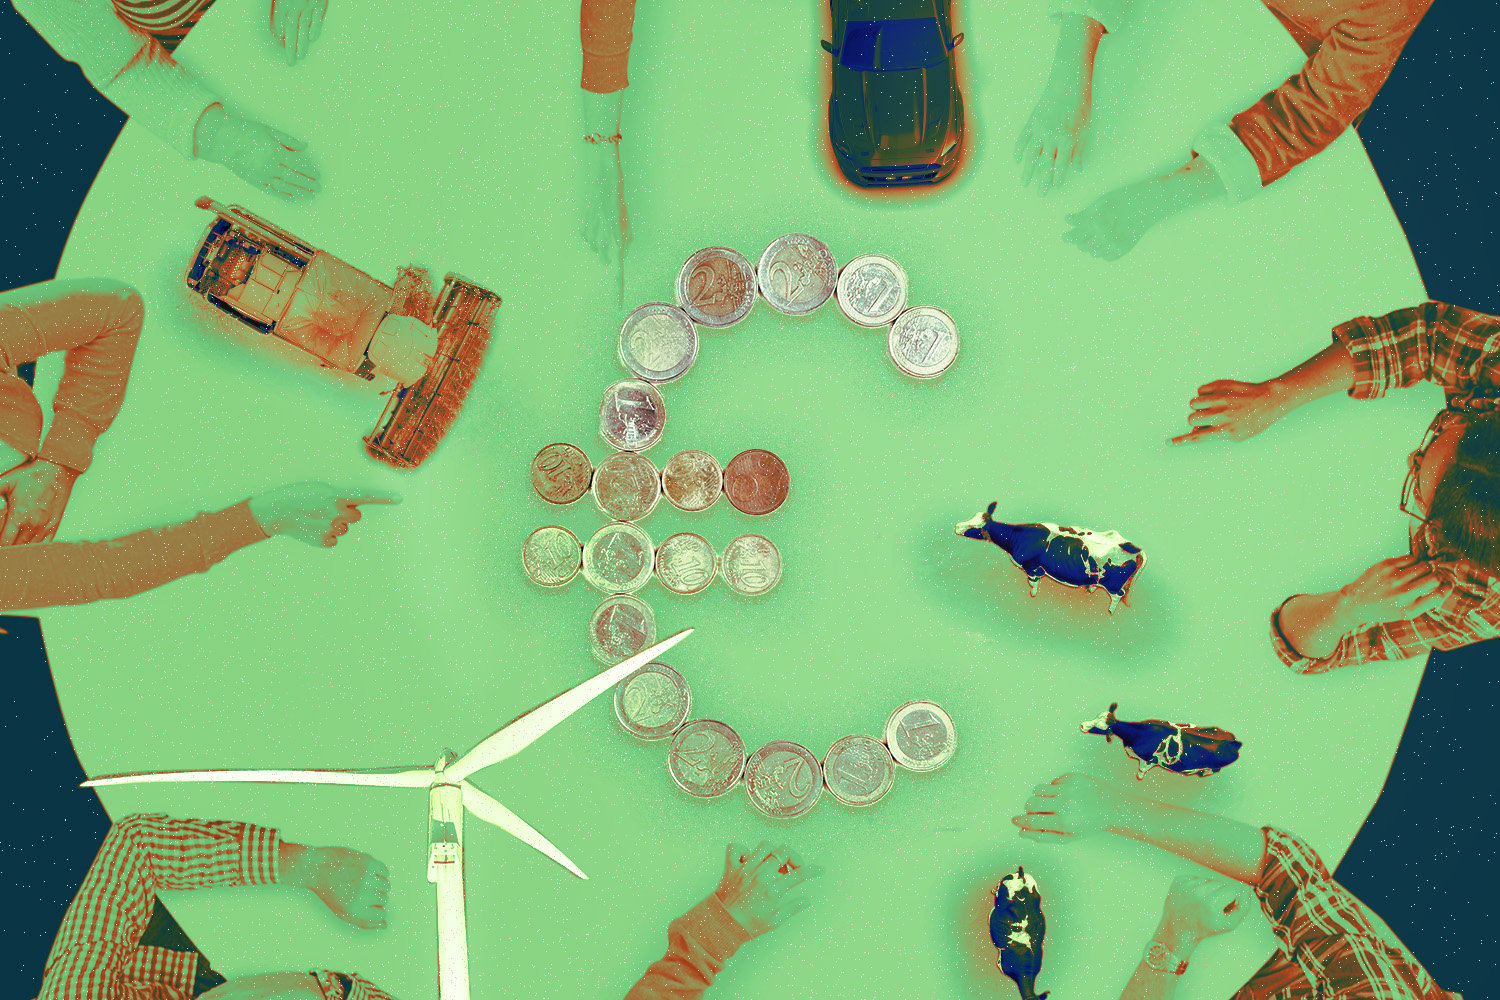 Illustration of people gathered around a table from above, table is green and holds little objects like a euro symbol made of coins, mini cows, a toy car, a toy tractor, and a small wind turbine. The hands around the table are all pointing at different objects.